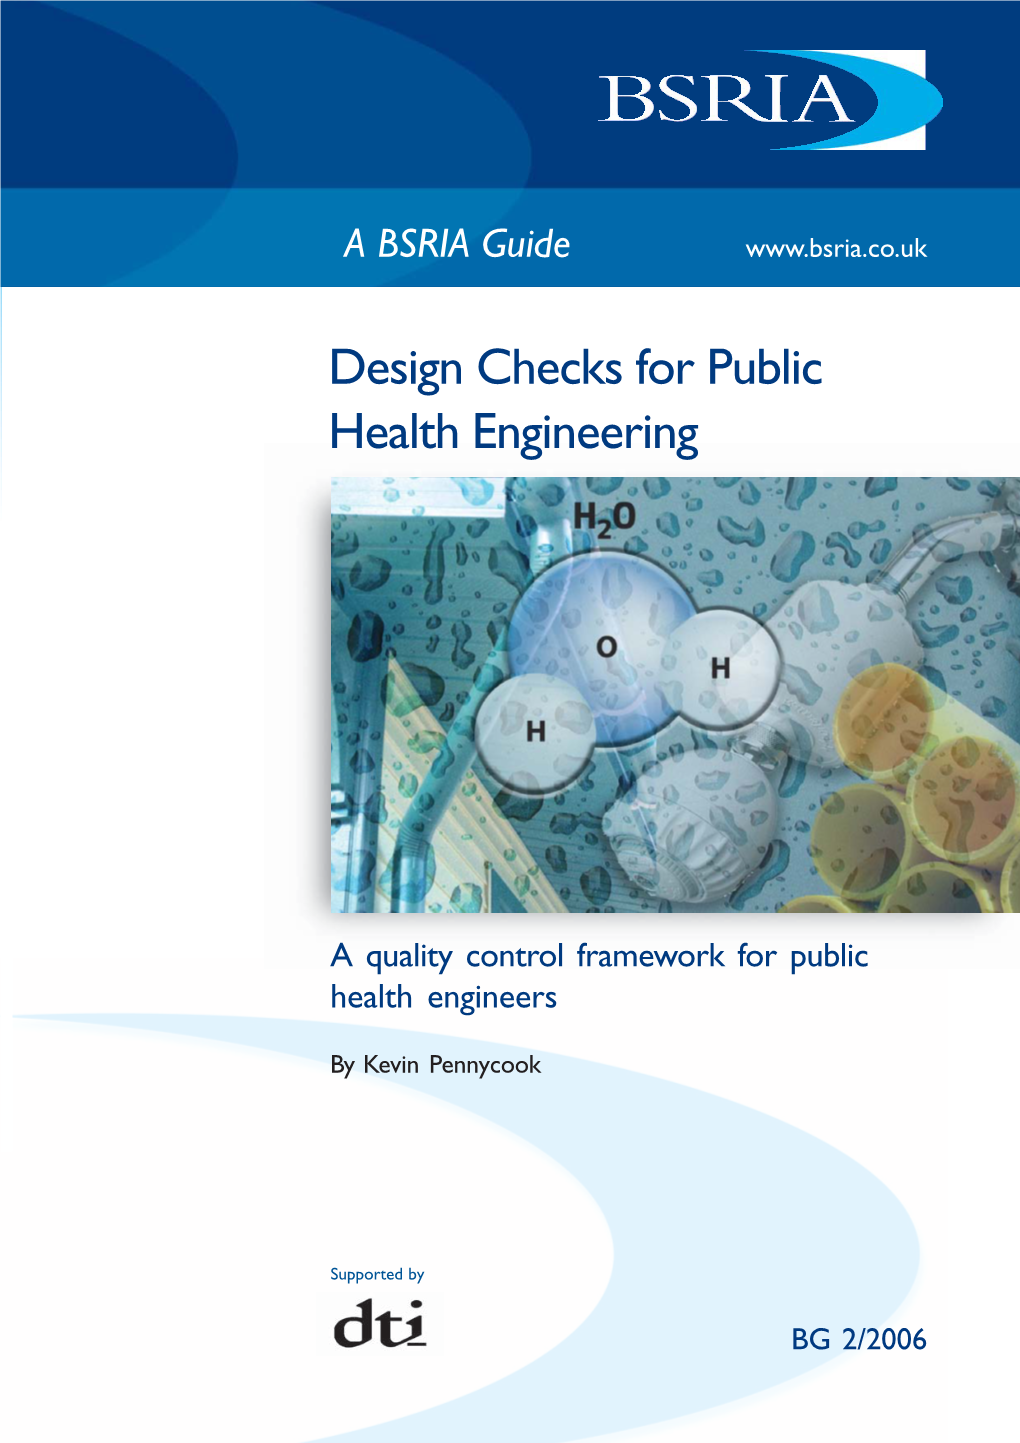 Micrdesign Checks for Public Health Engineering. a Quality Control